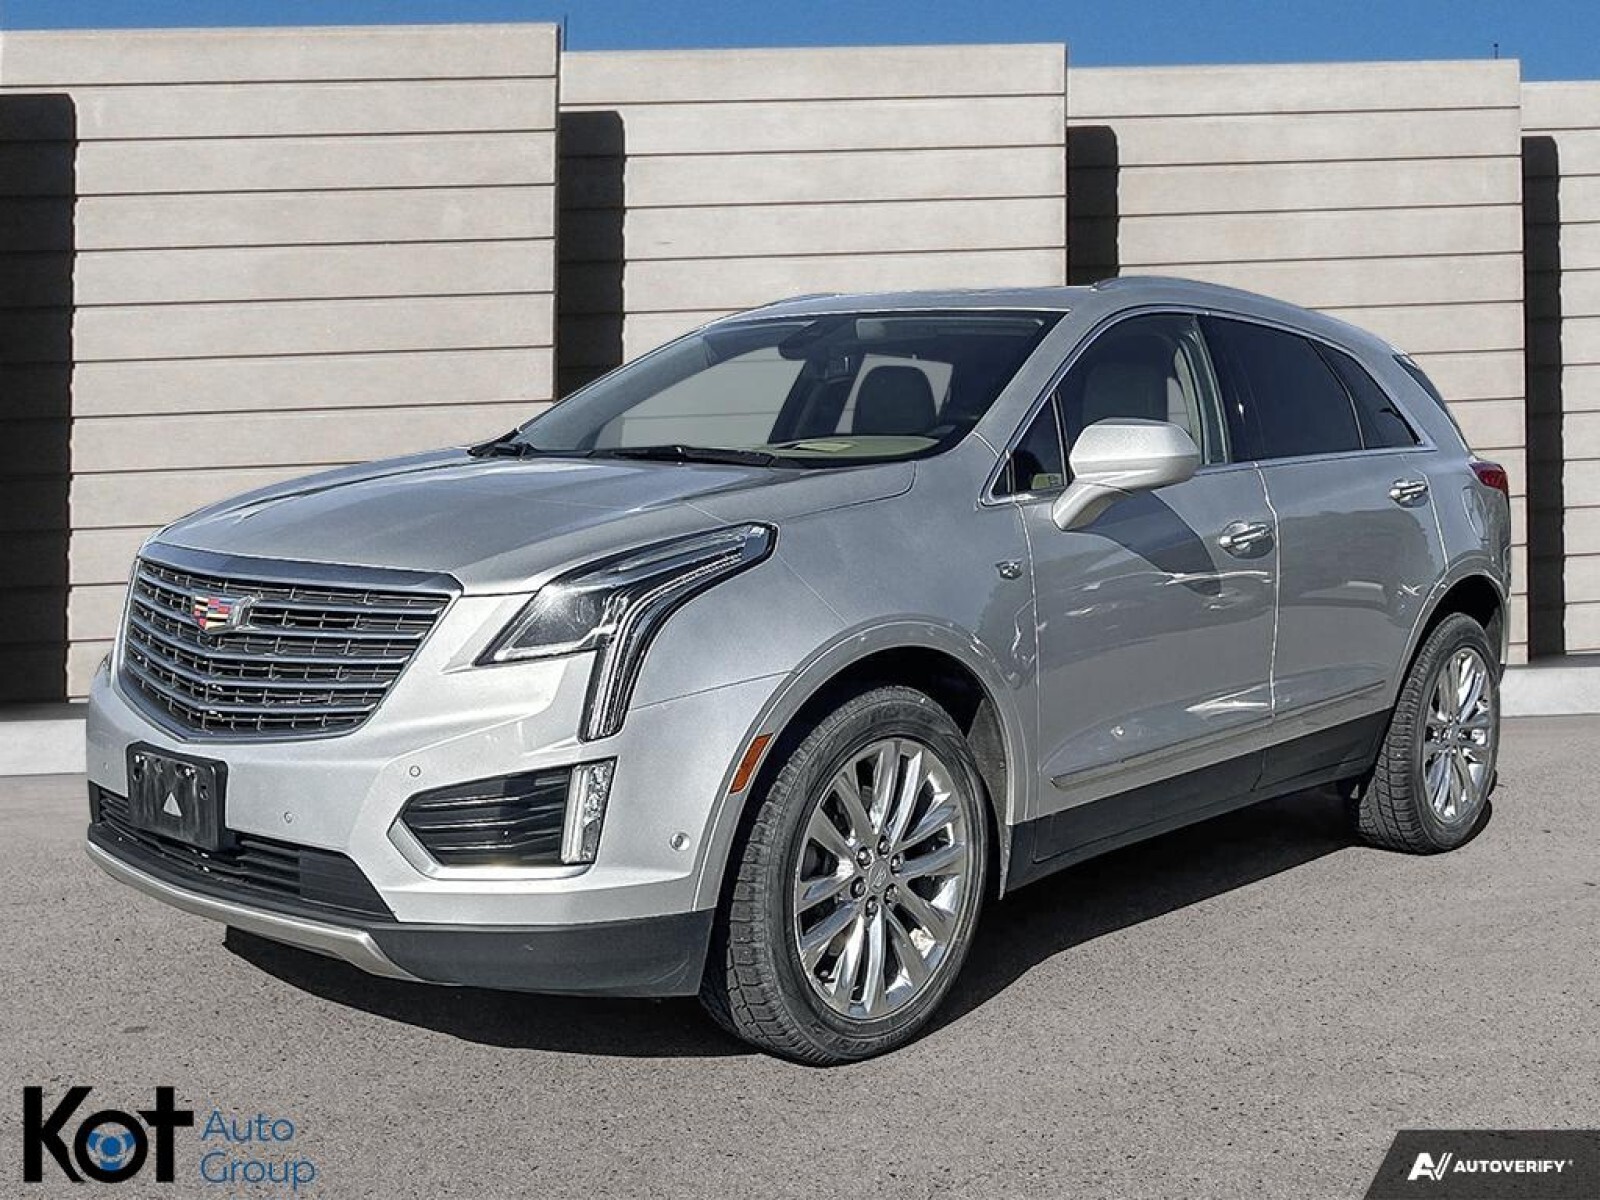 2017 Cadillac XT5 Platinum AWD Fully loaded w/NAV Leather great cond